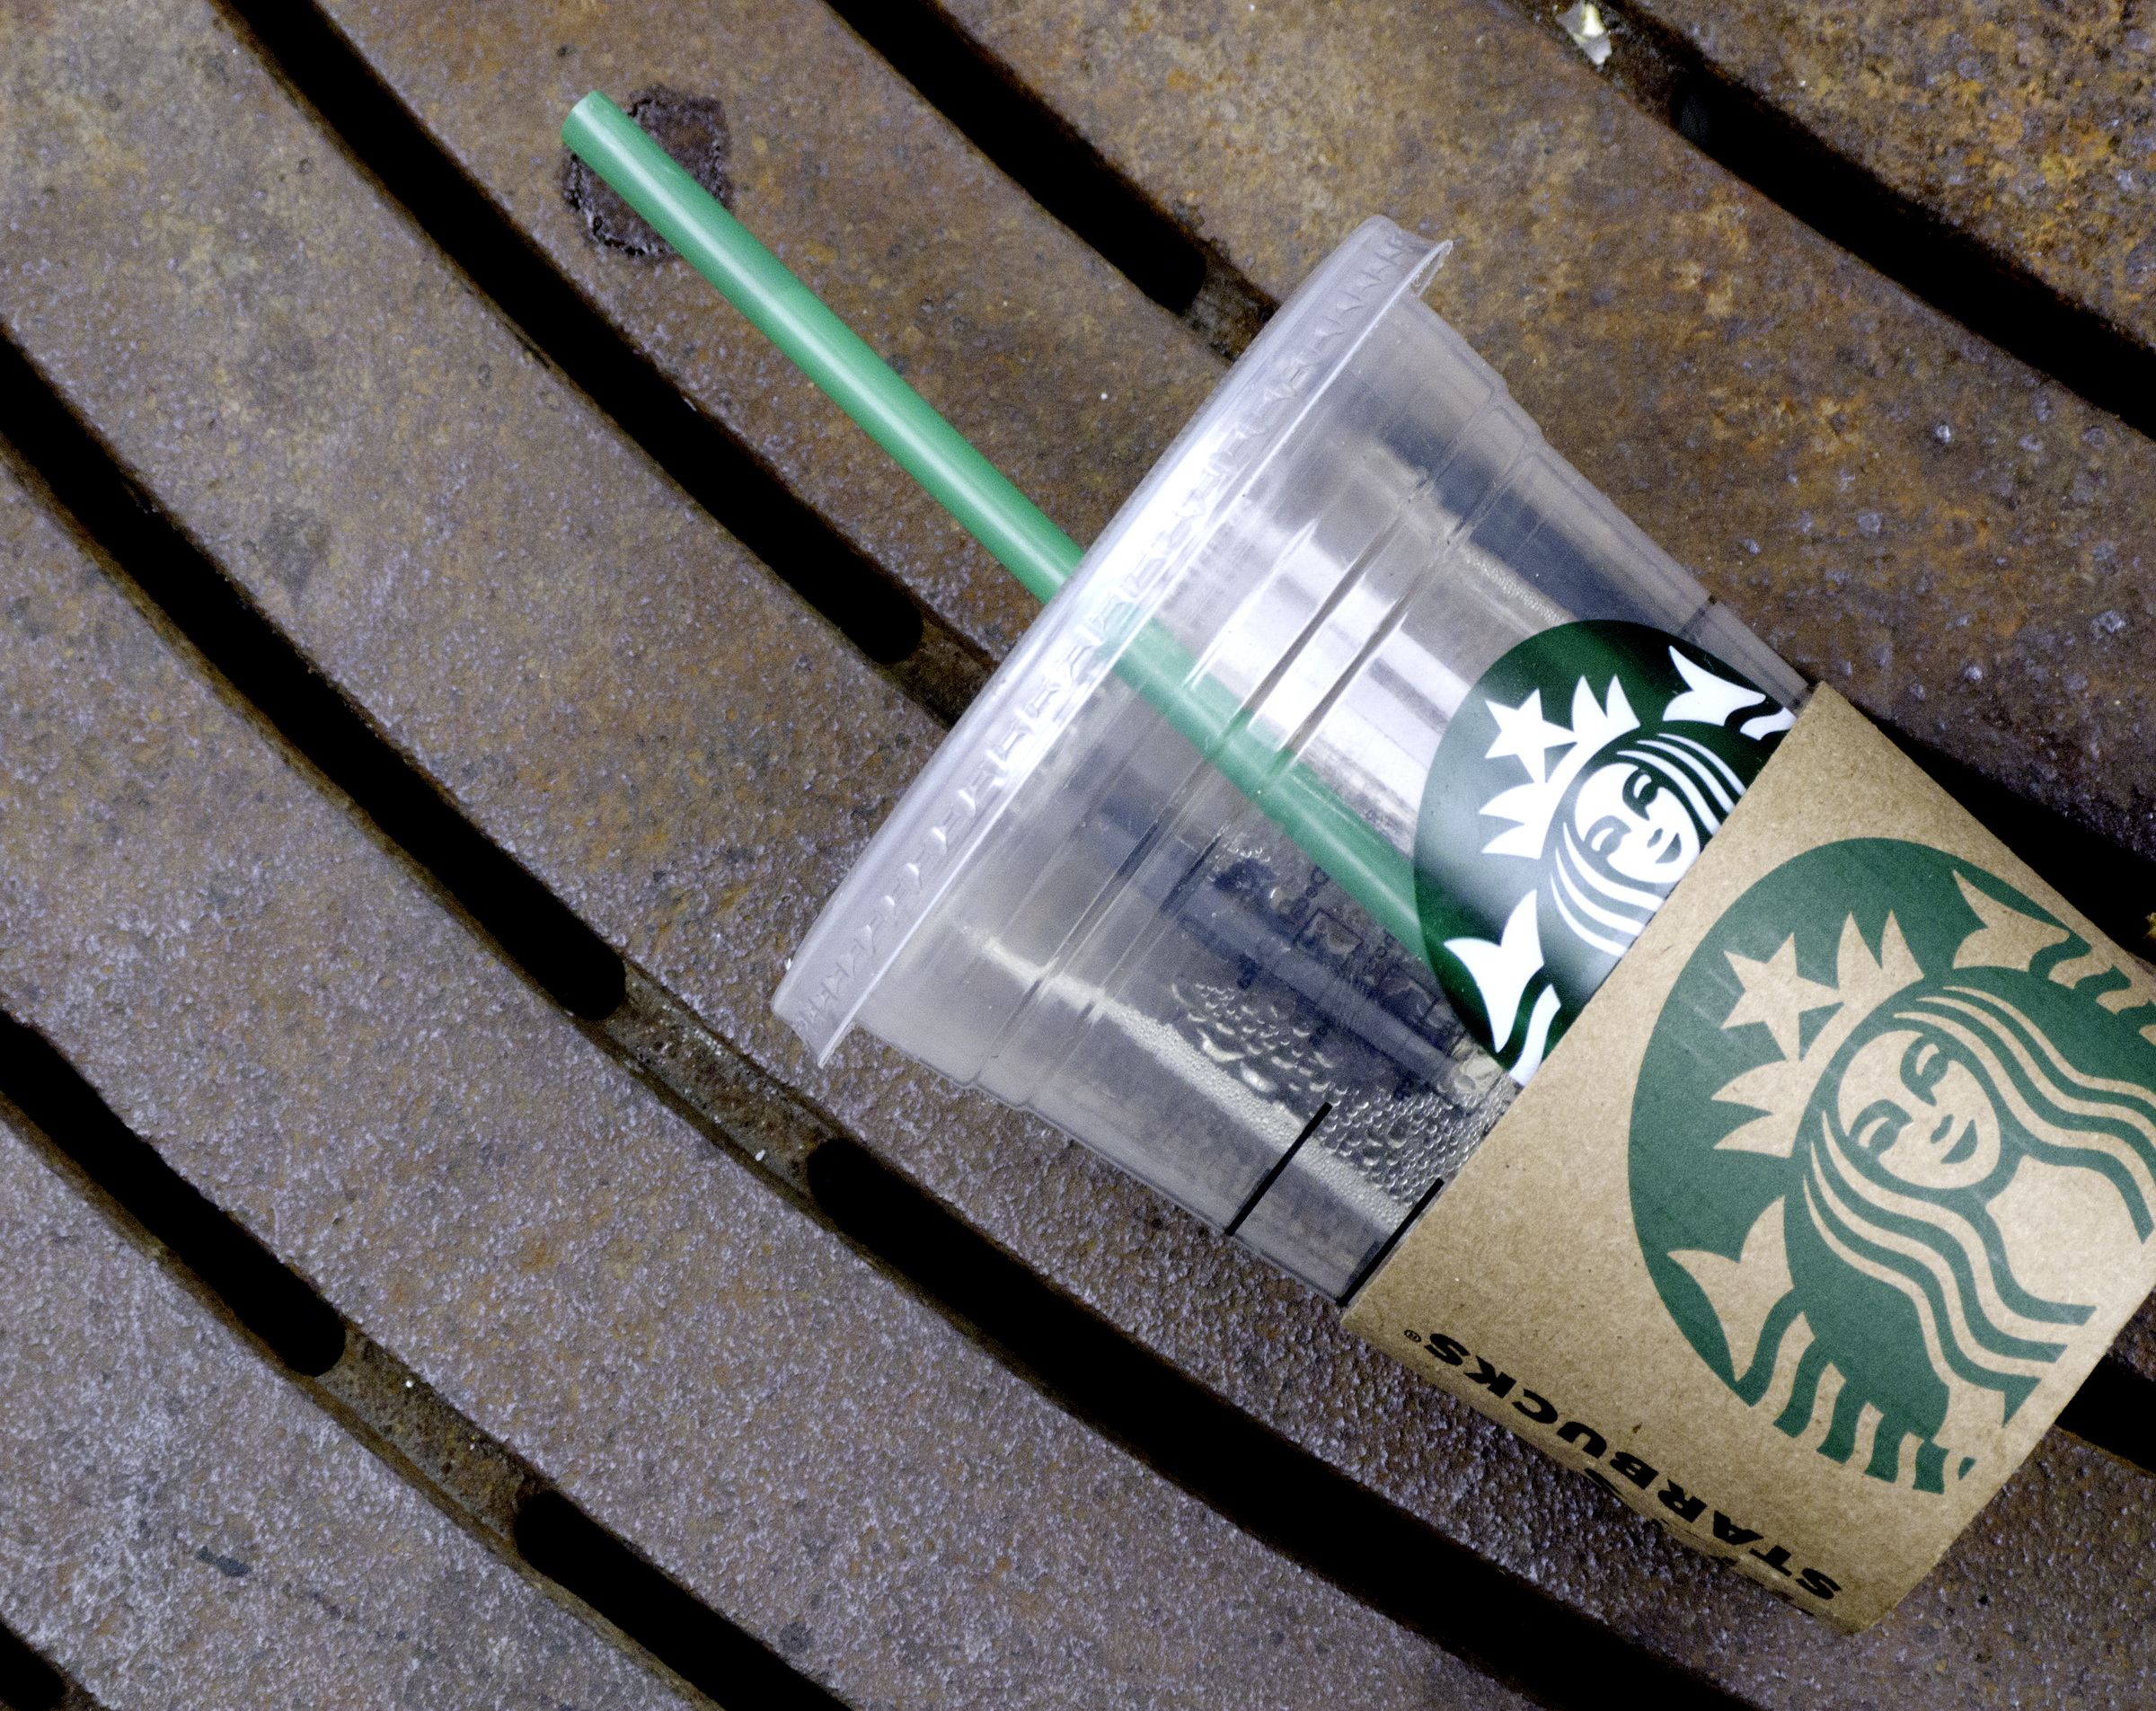 Starbucks Responds to Straw Ban Backlash - Disability Rights